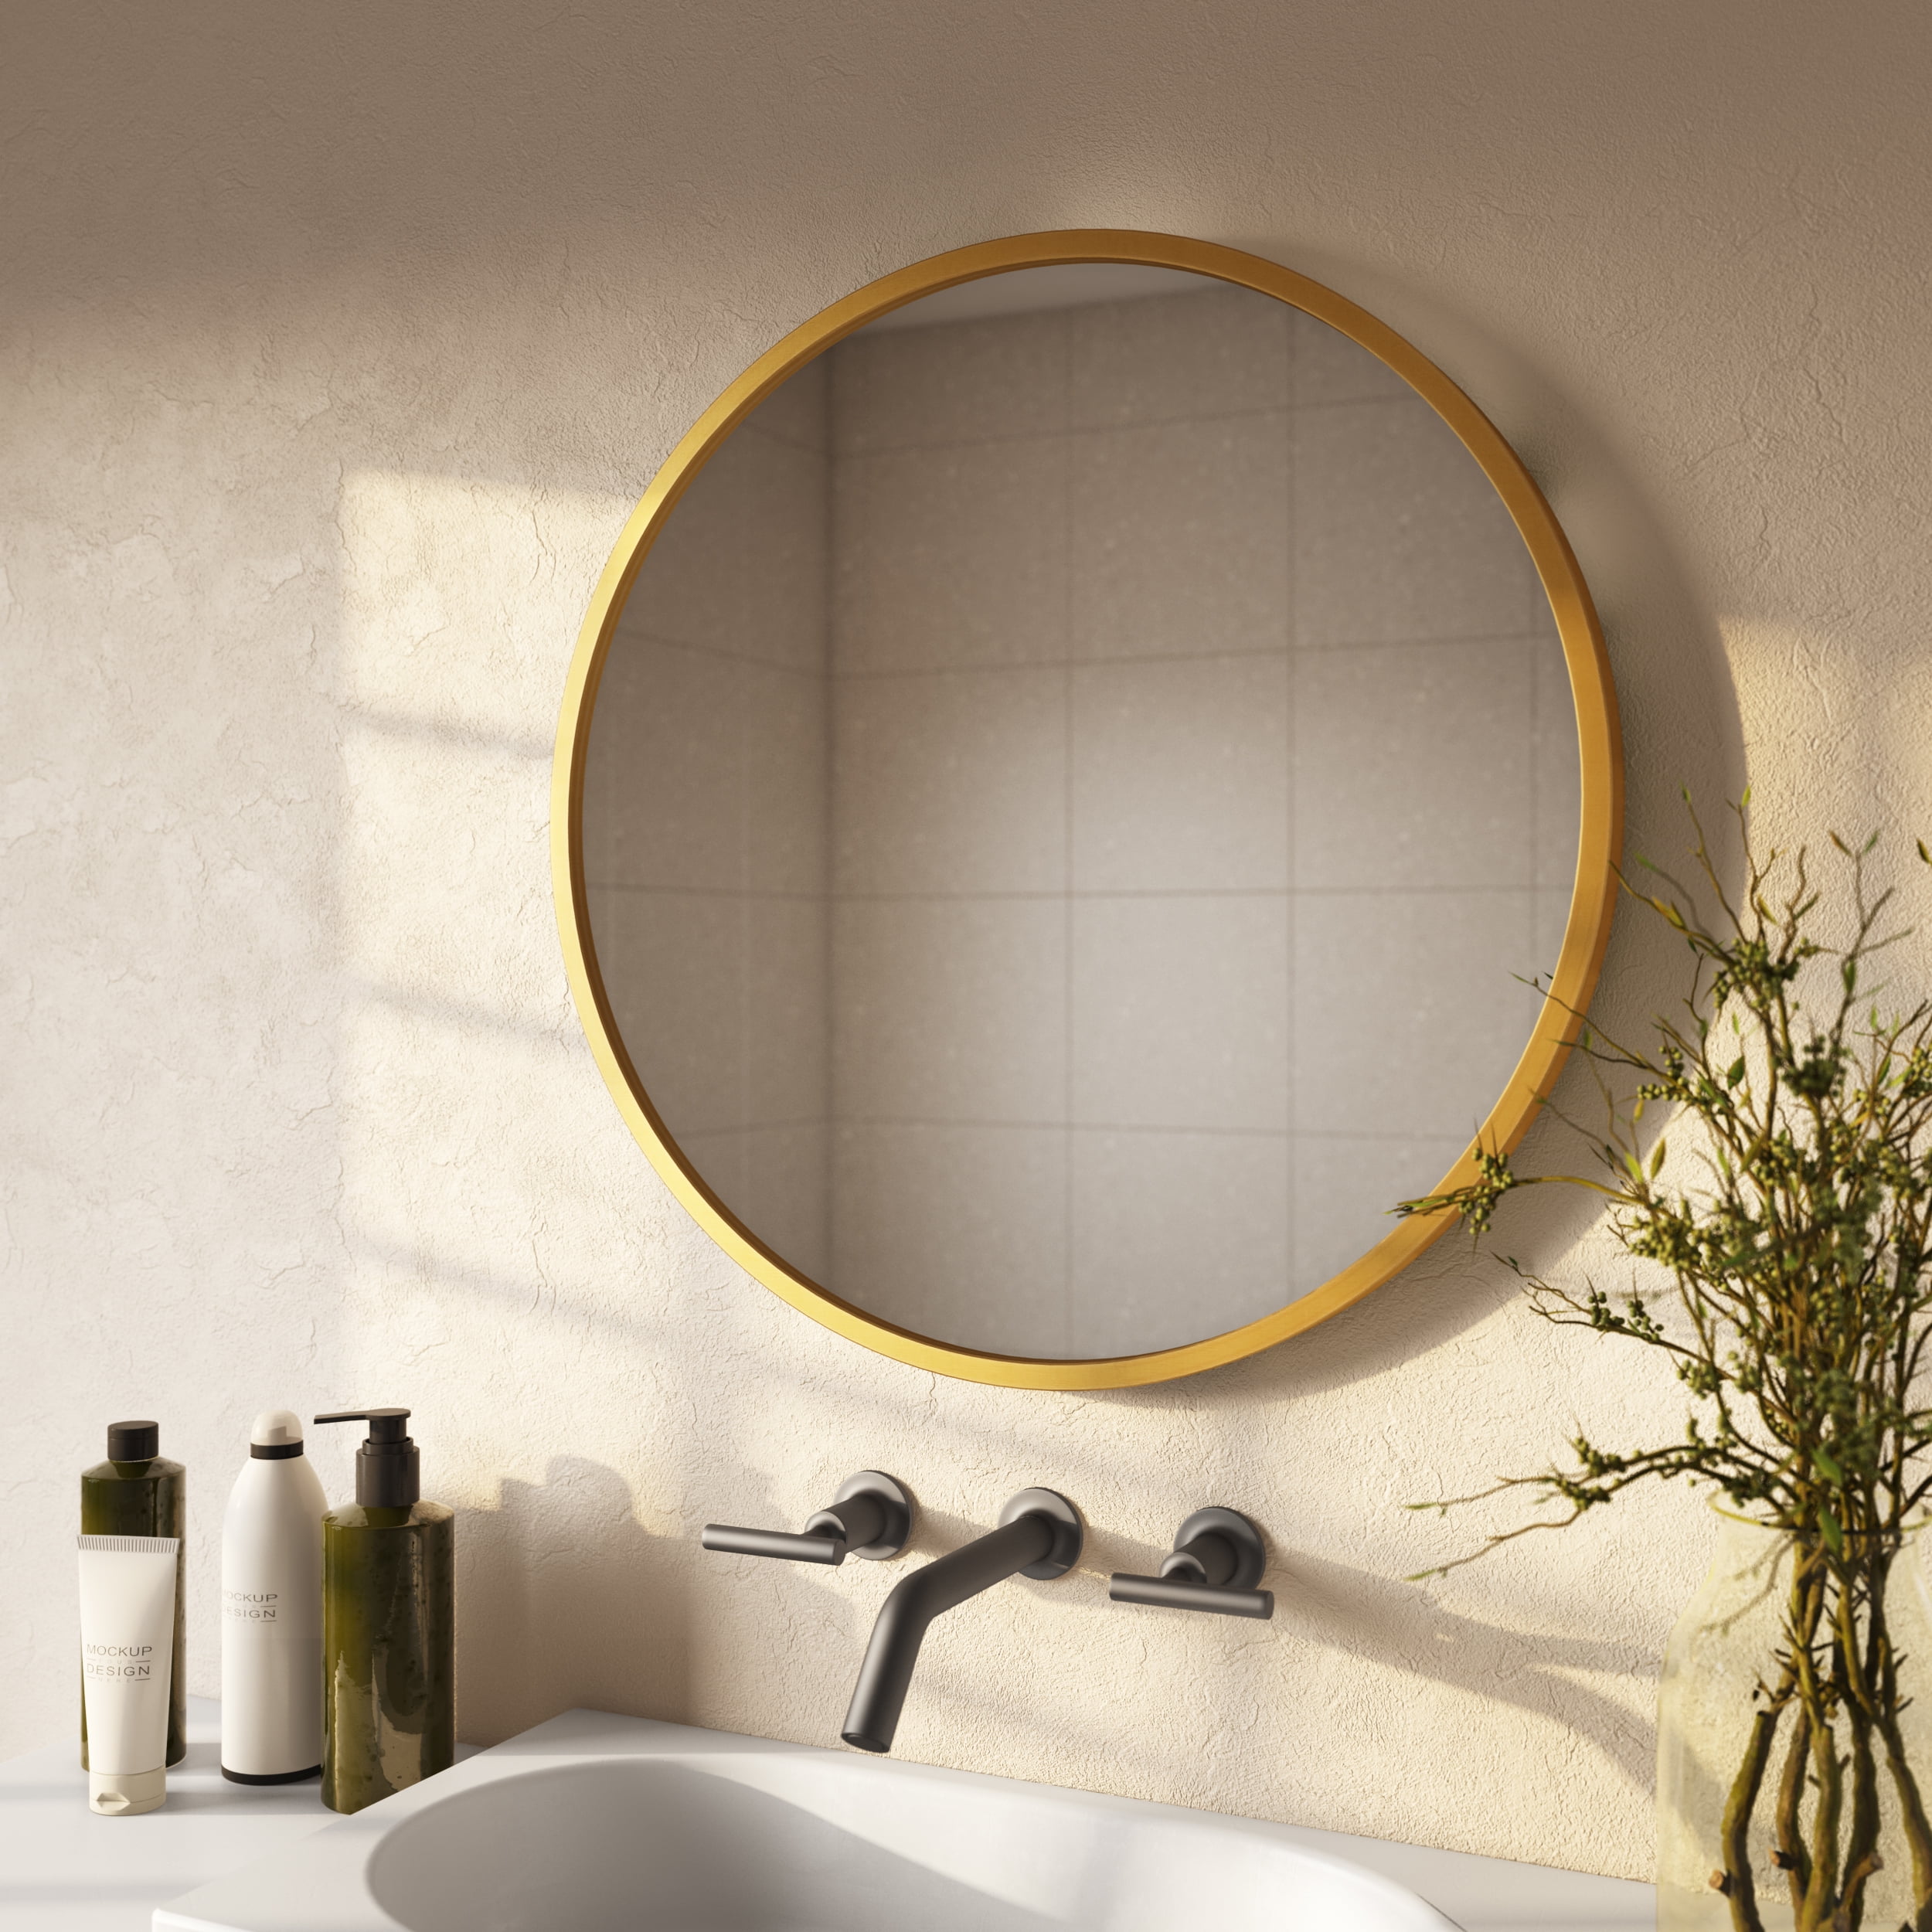 Picture of Aspire Home Accents 7494 Bali Modern Round Wall Mirror, Gold - 24 in.